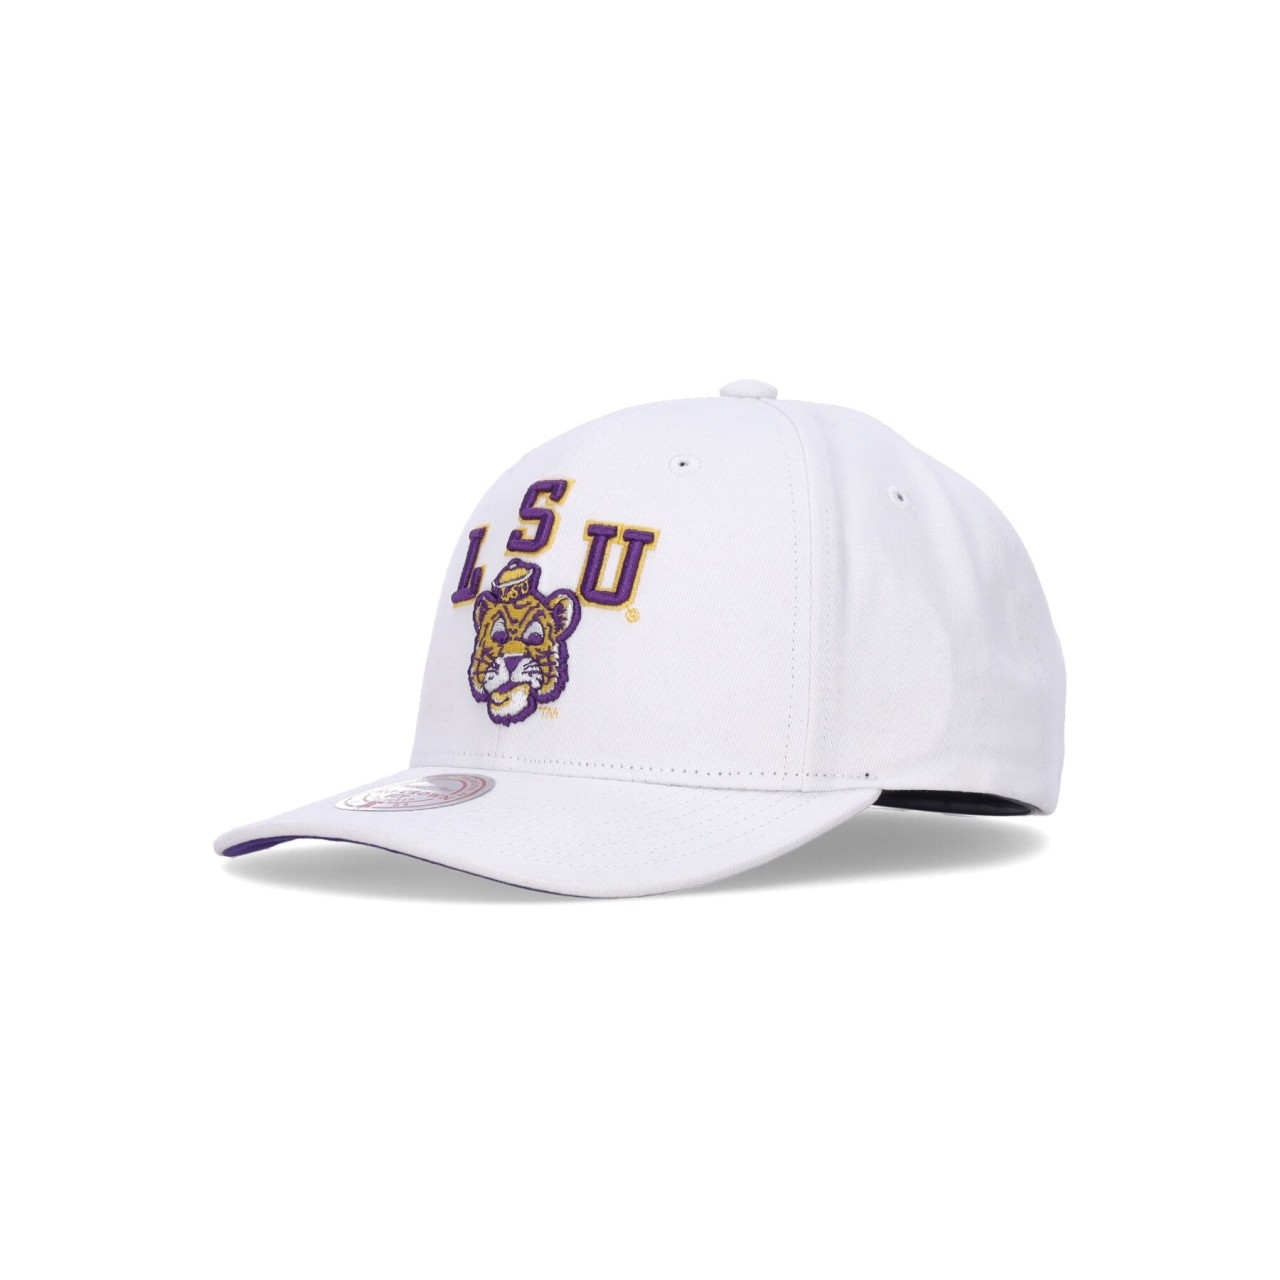 MITCHELL & NESS NCAA ALL IN PRO SNAPBACK LOUTIG HHSS5718-LSUYYPPPWHIT